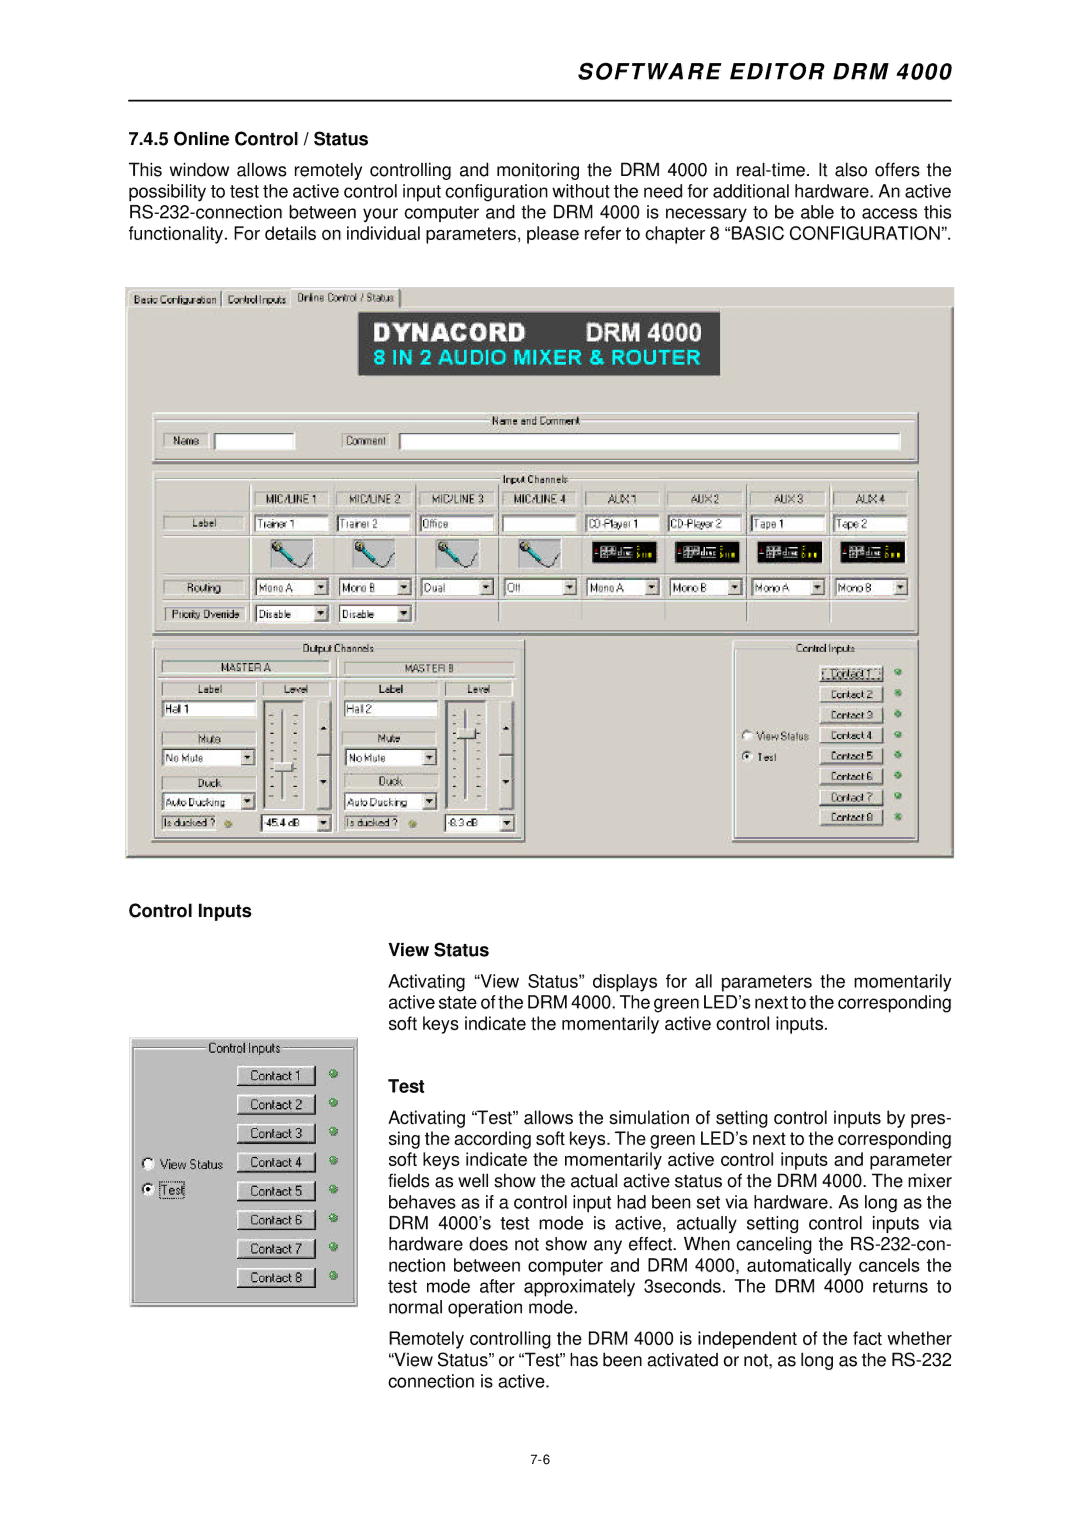 Dynacord DRM 4000 owner manual Online Control / Status, Control Inputs View Status, Test 